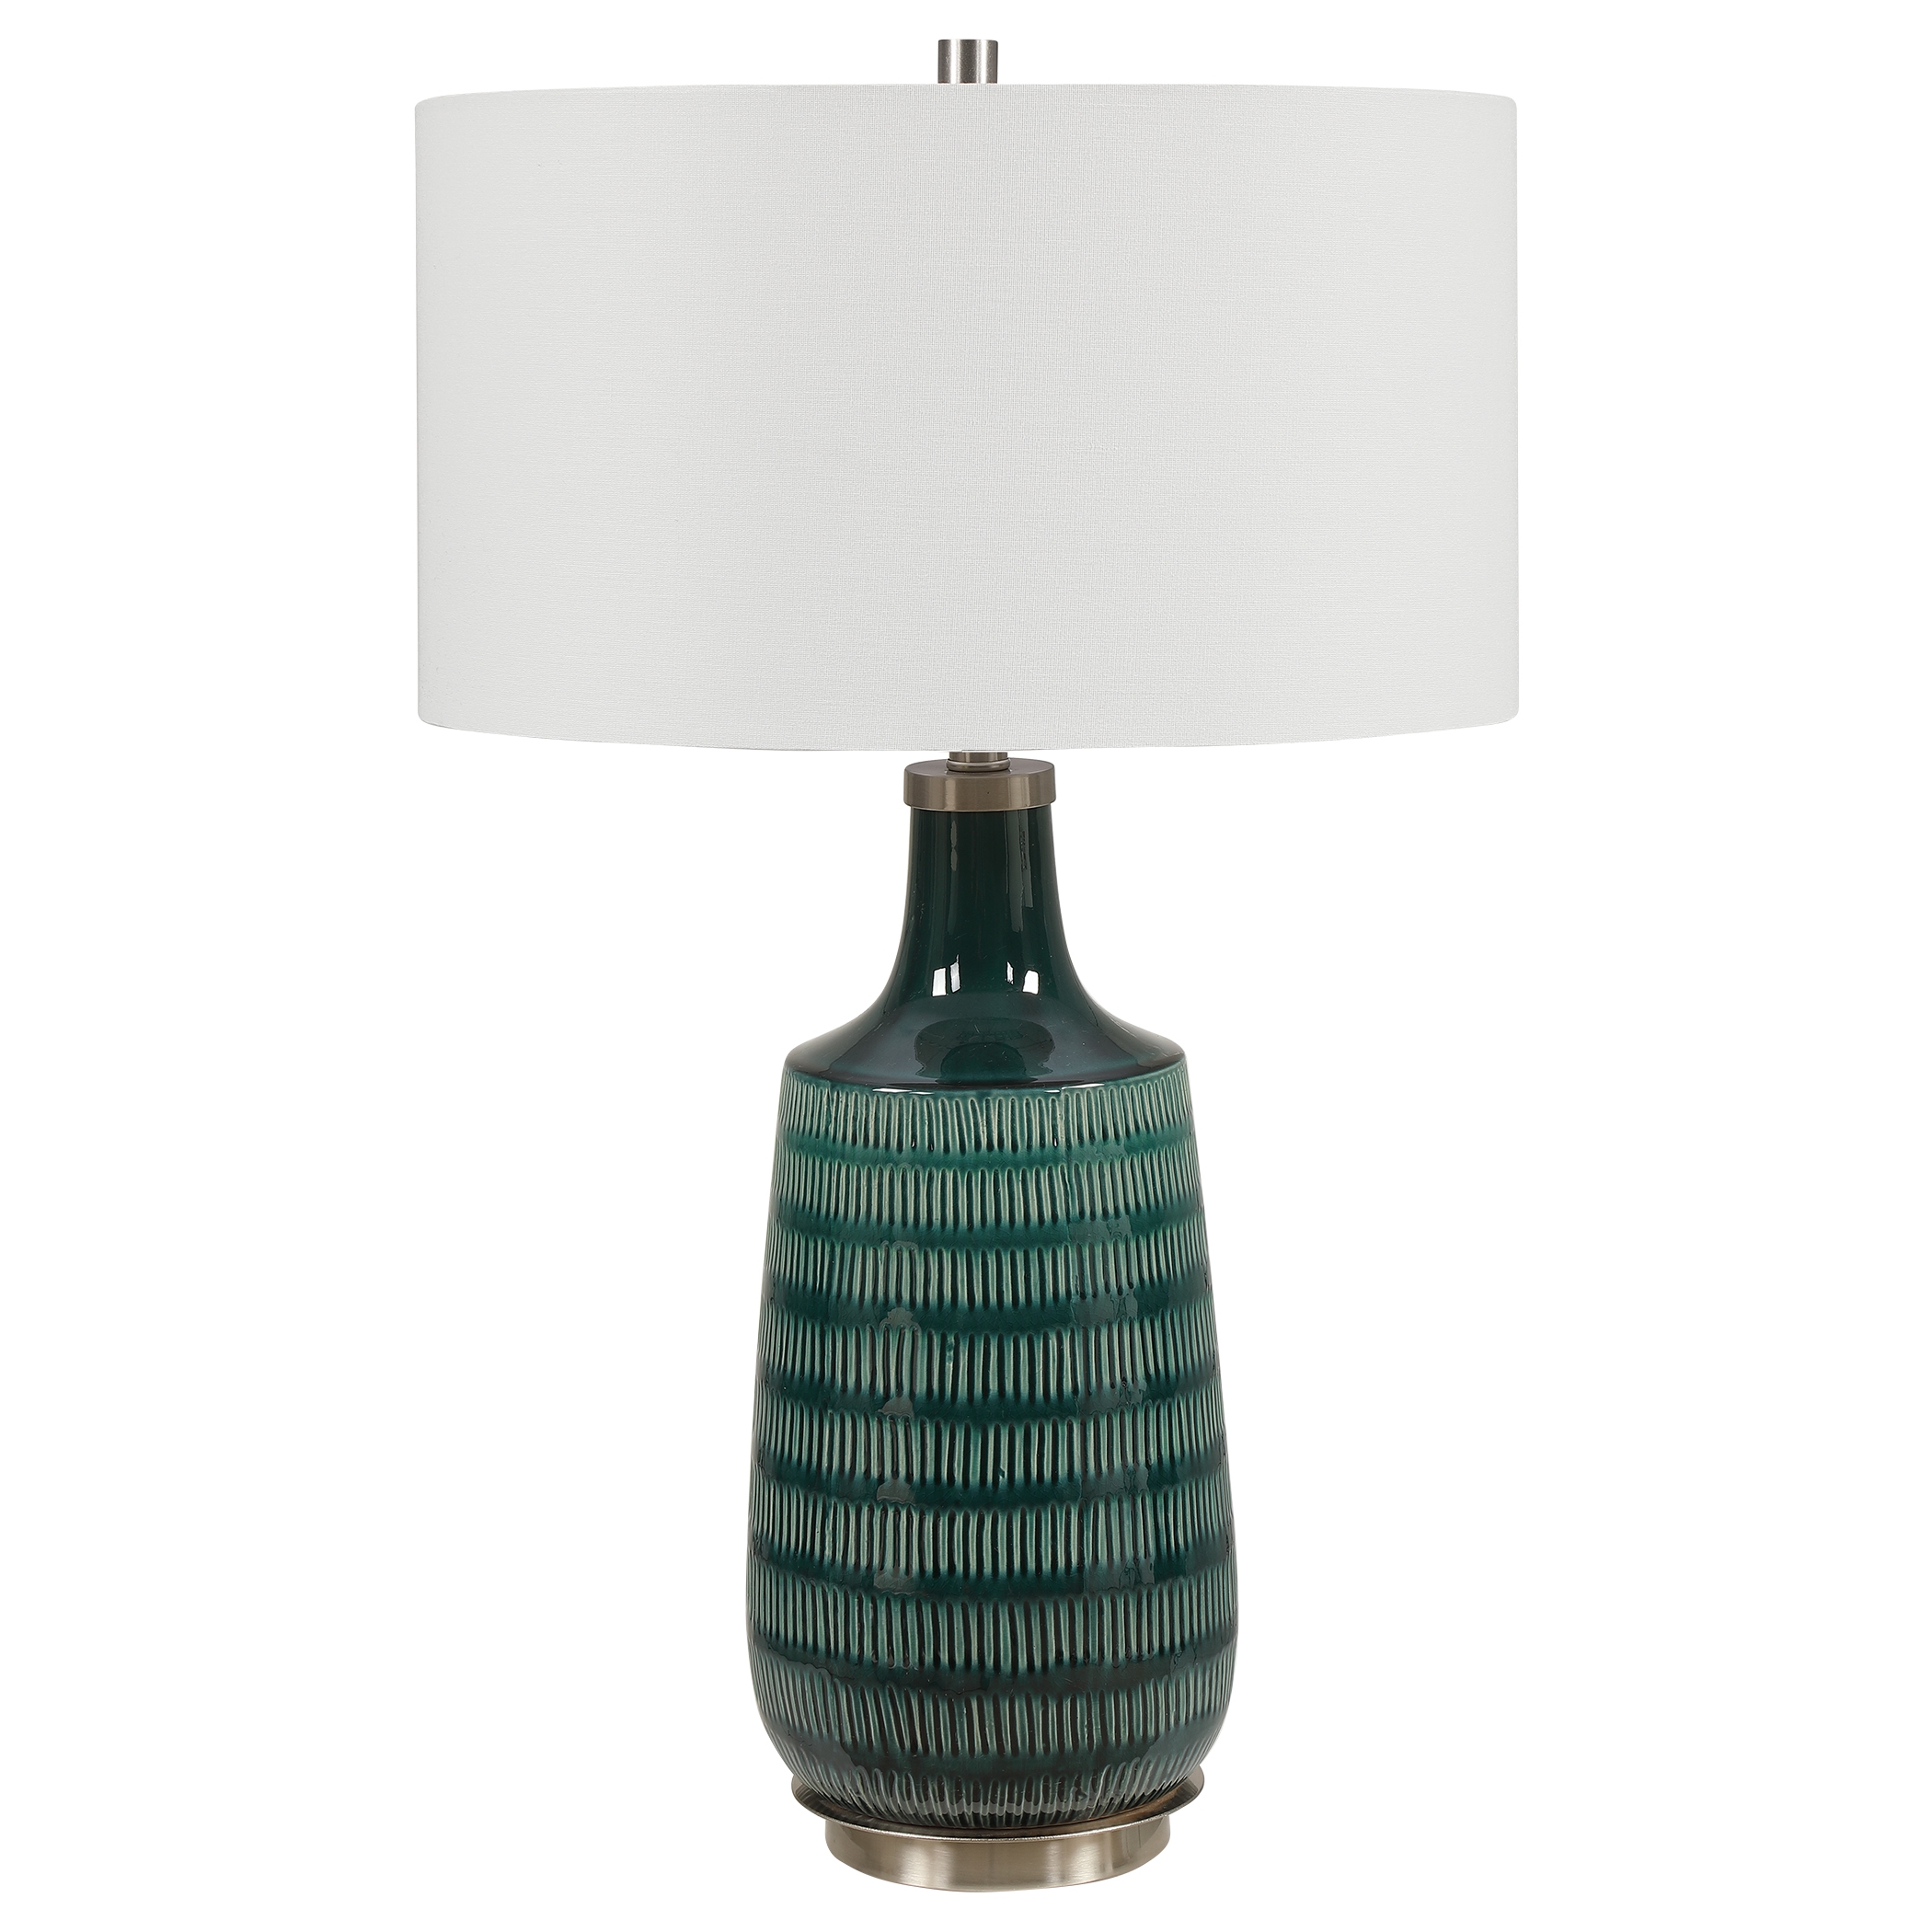 Scouts Deep Green Table Lamp - Image 2